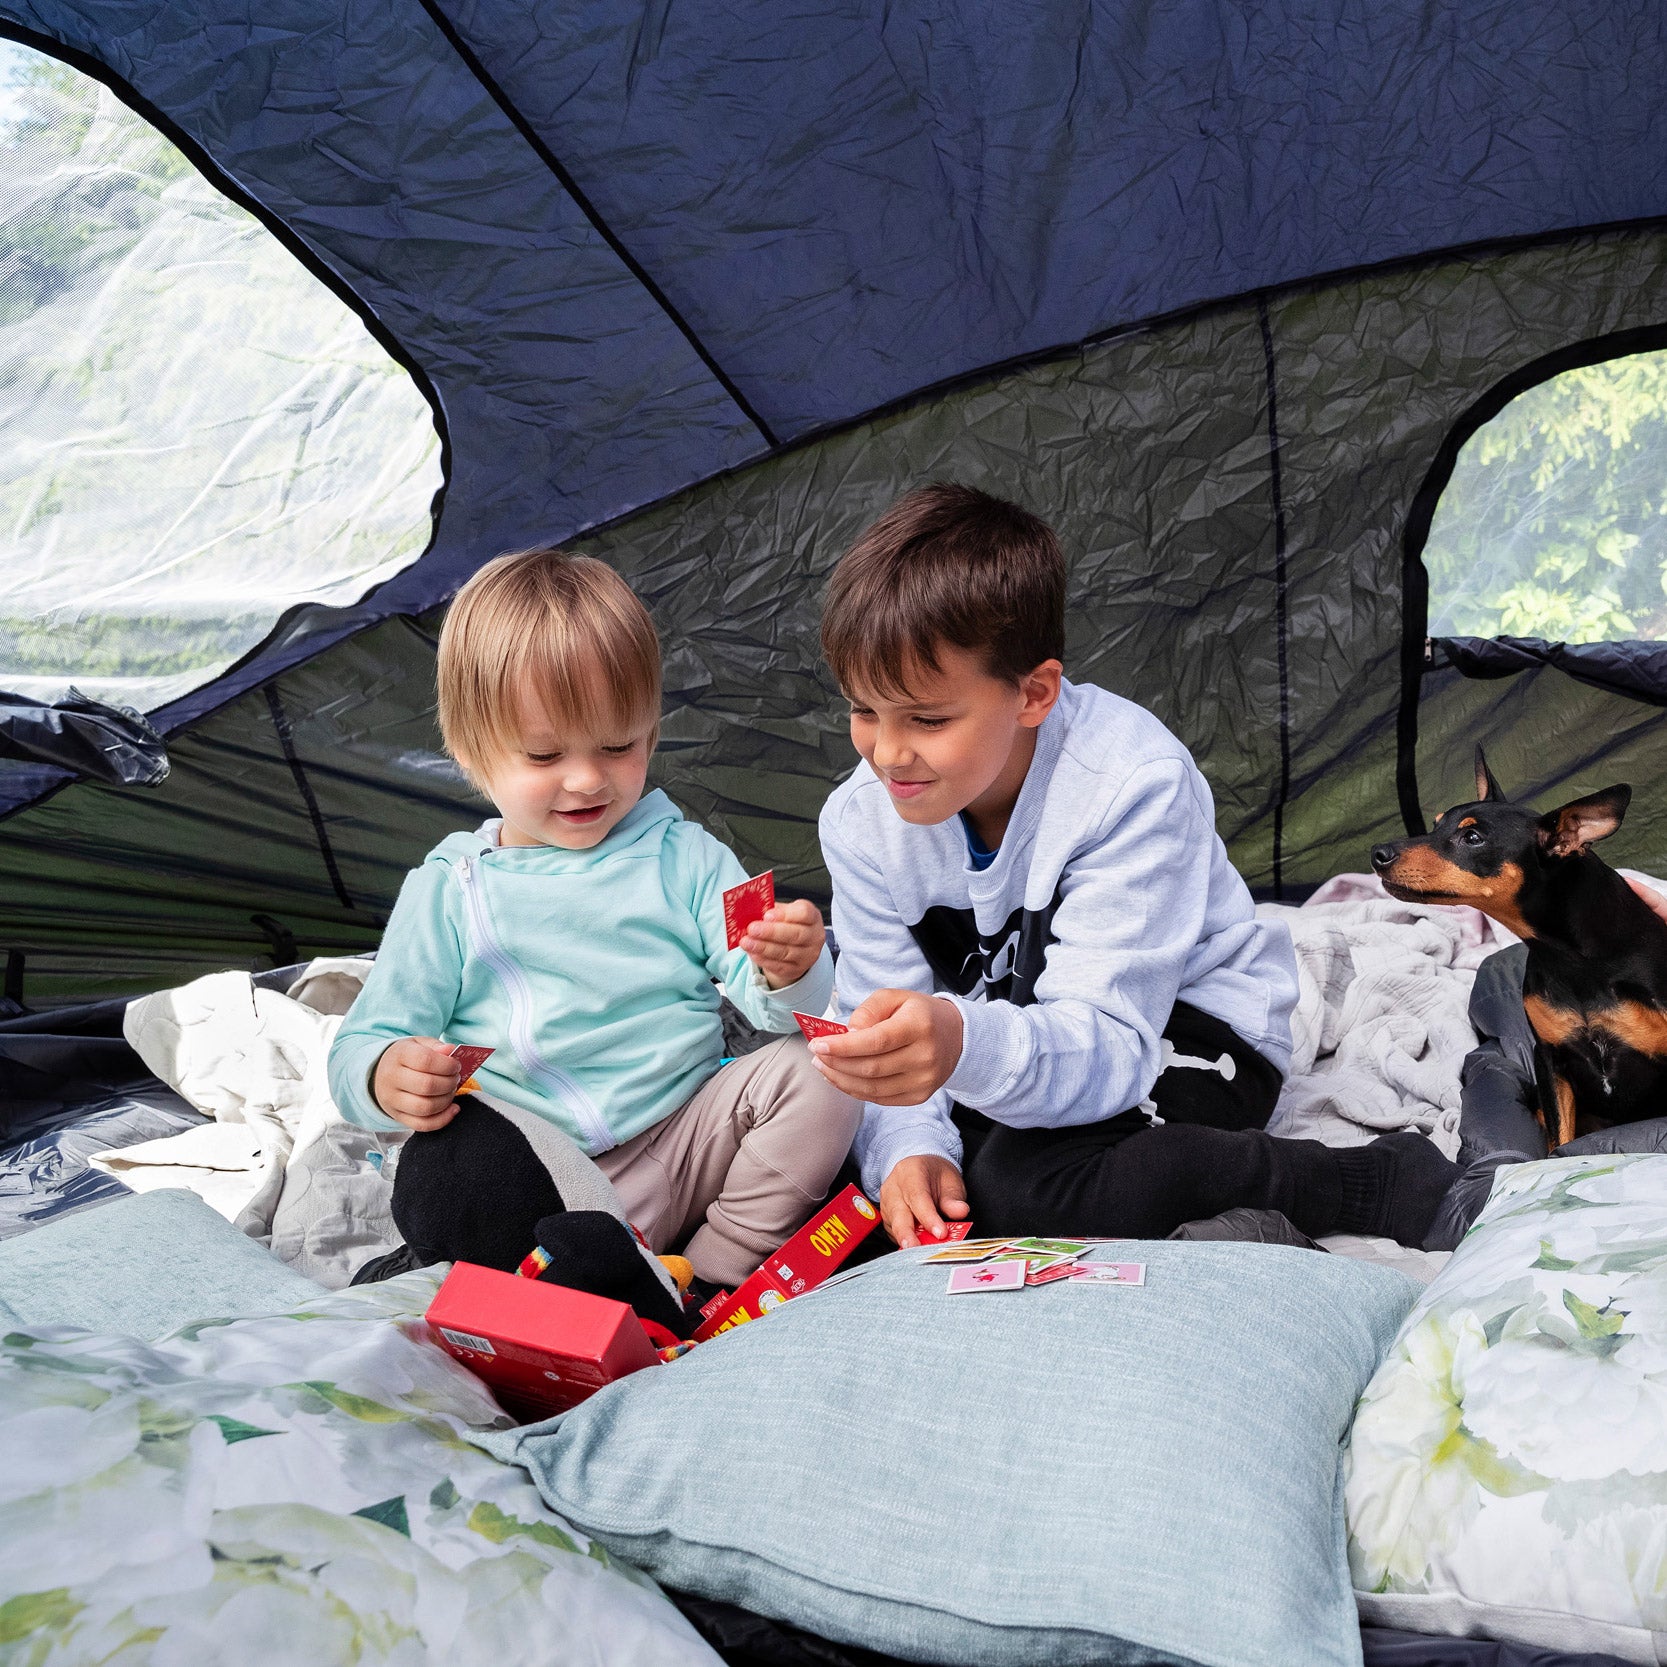 Kids playing card in a trampoline tent, a dog watching.